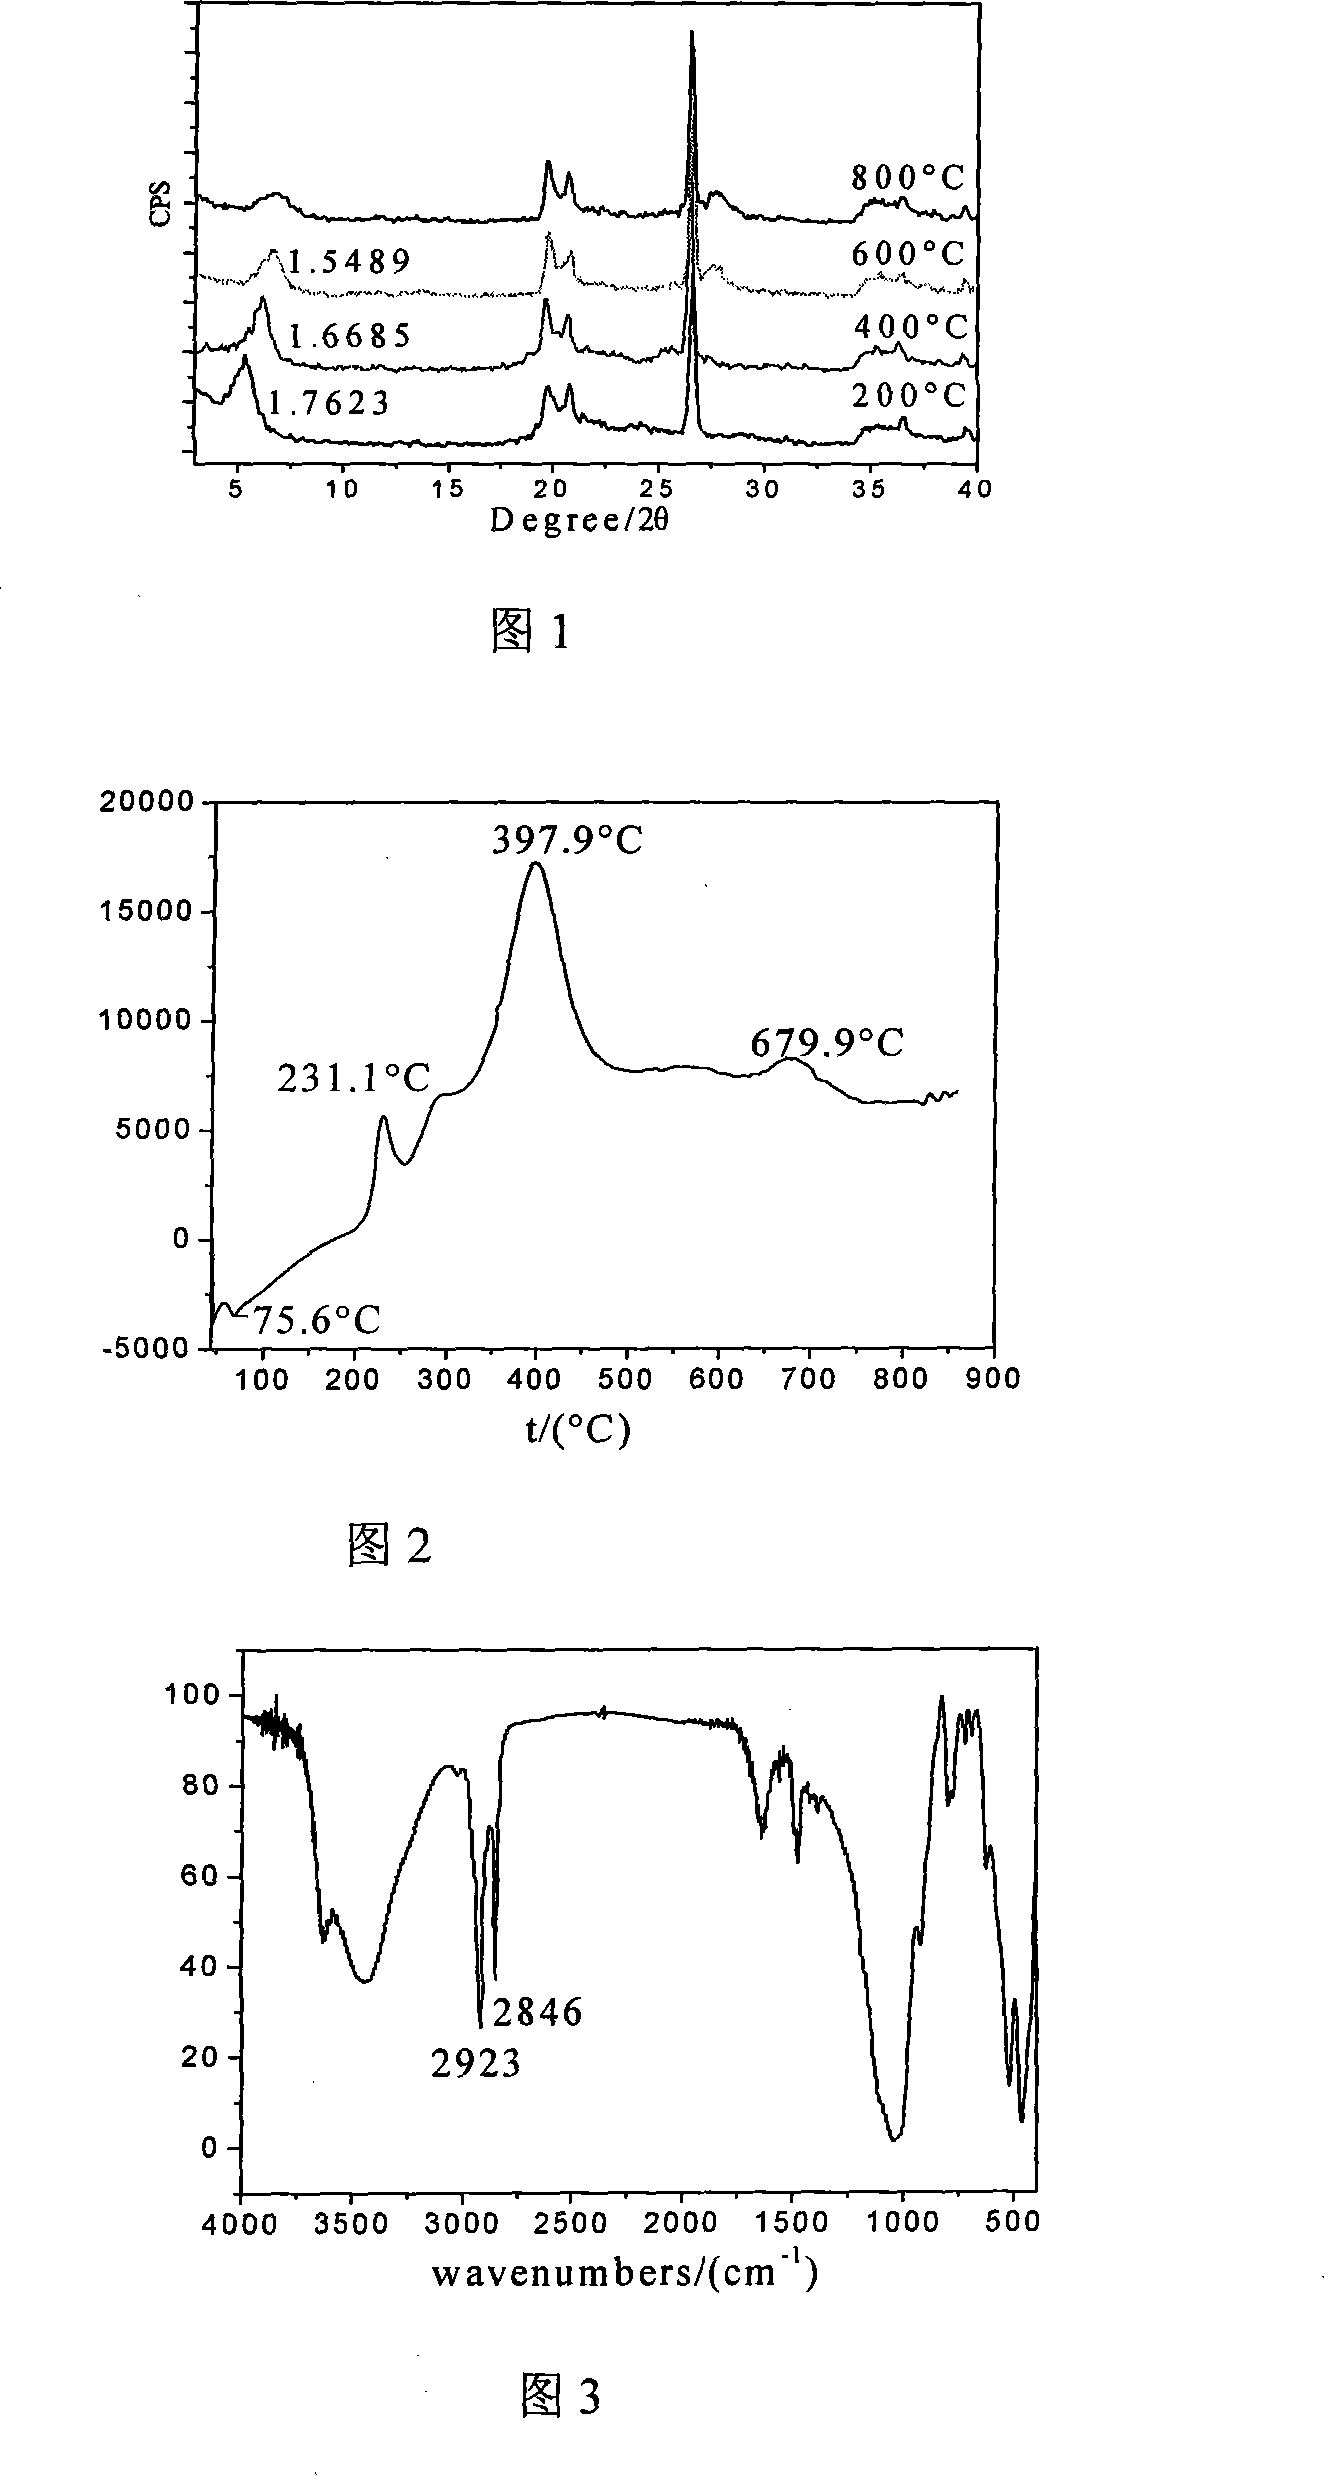 Composite cross-linking pole support bentonite intercalation desulfurizer and preparation method thereof